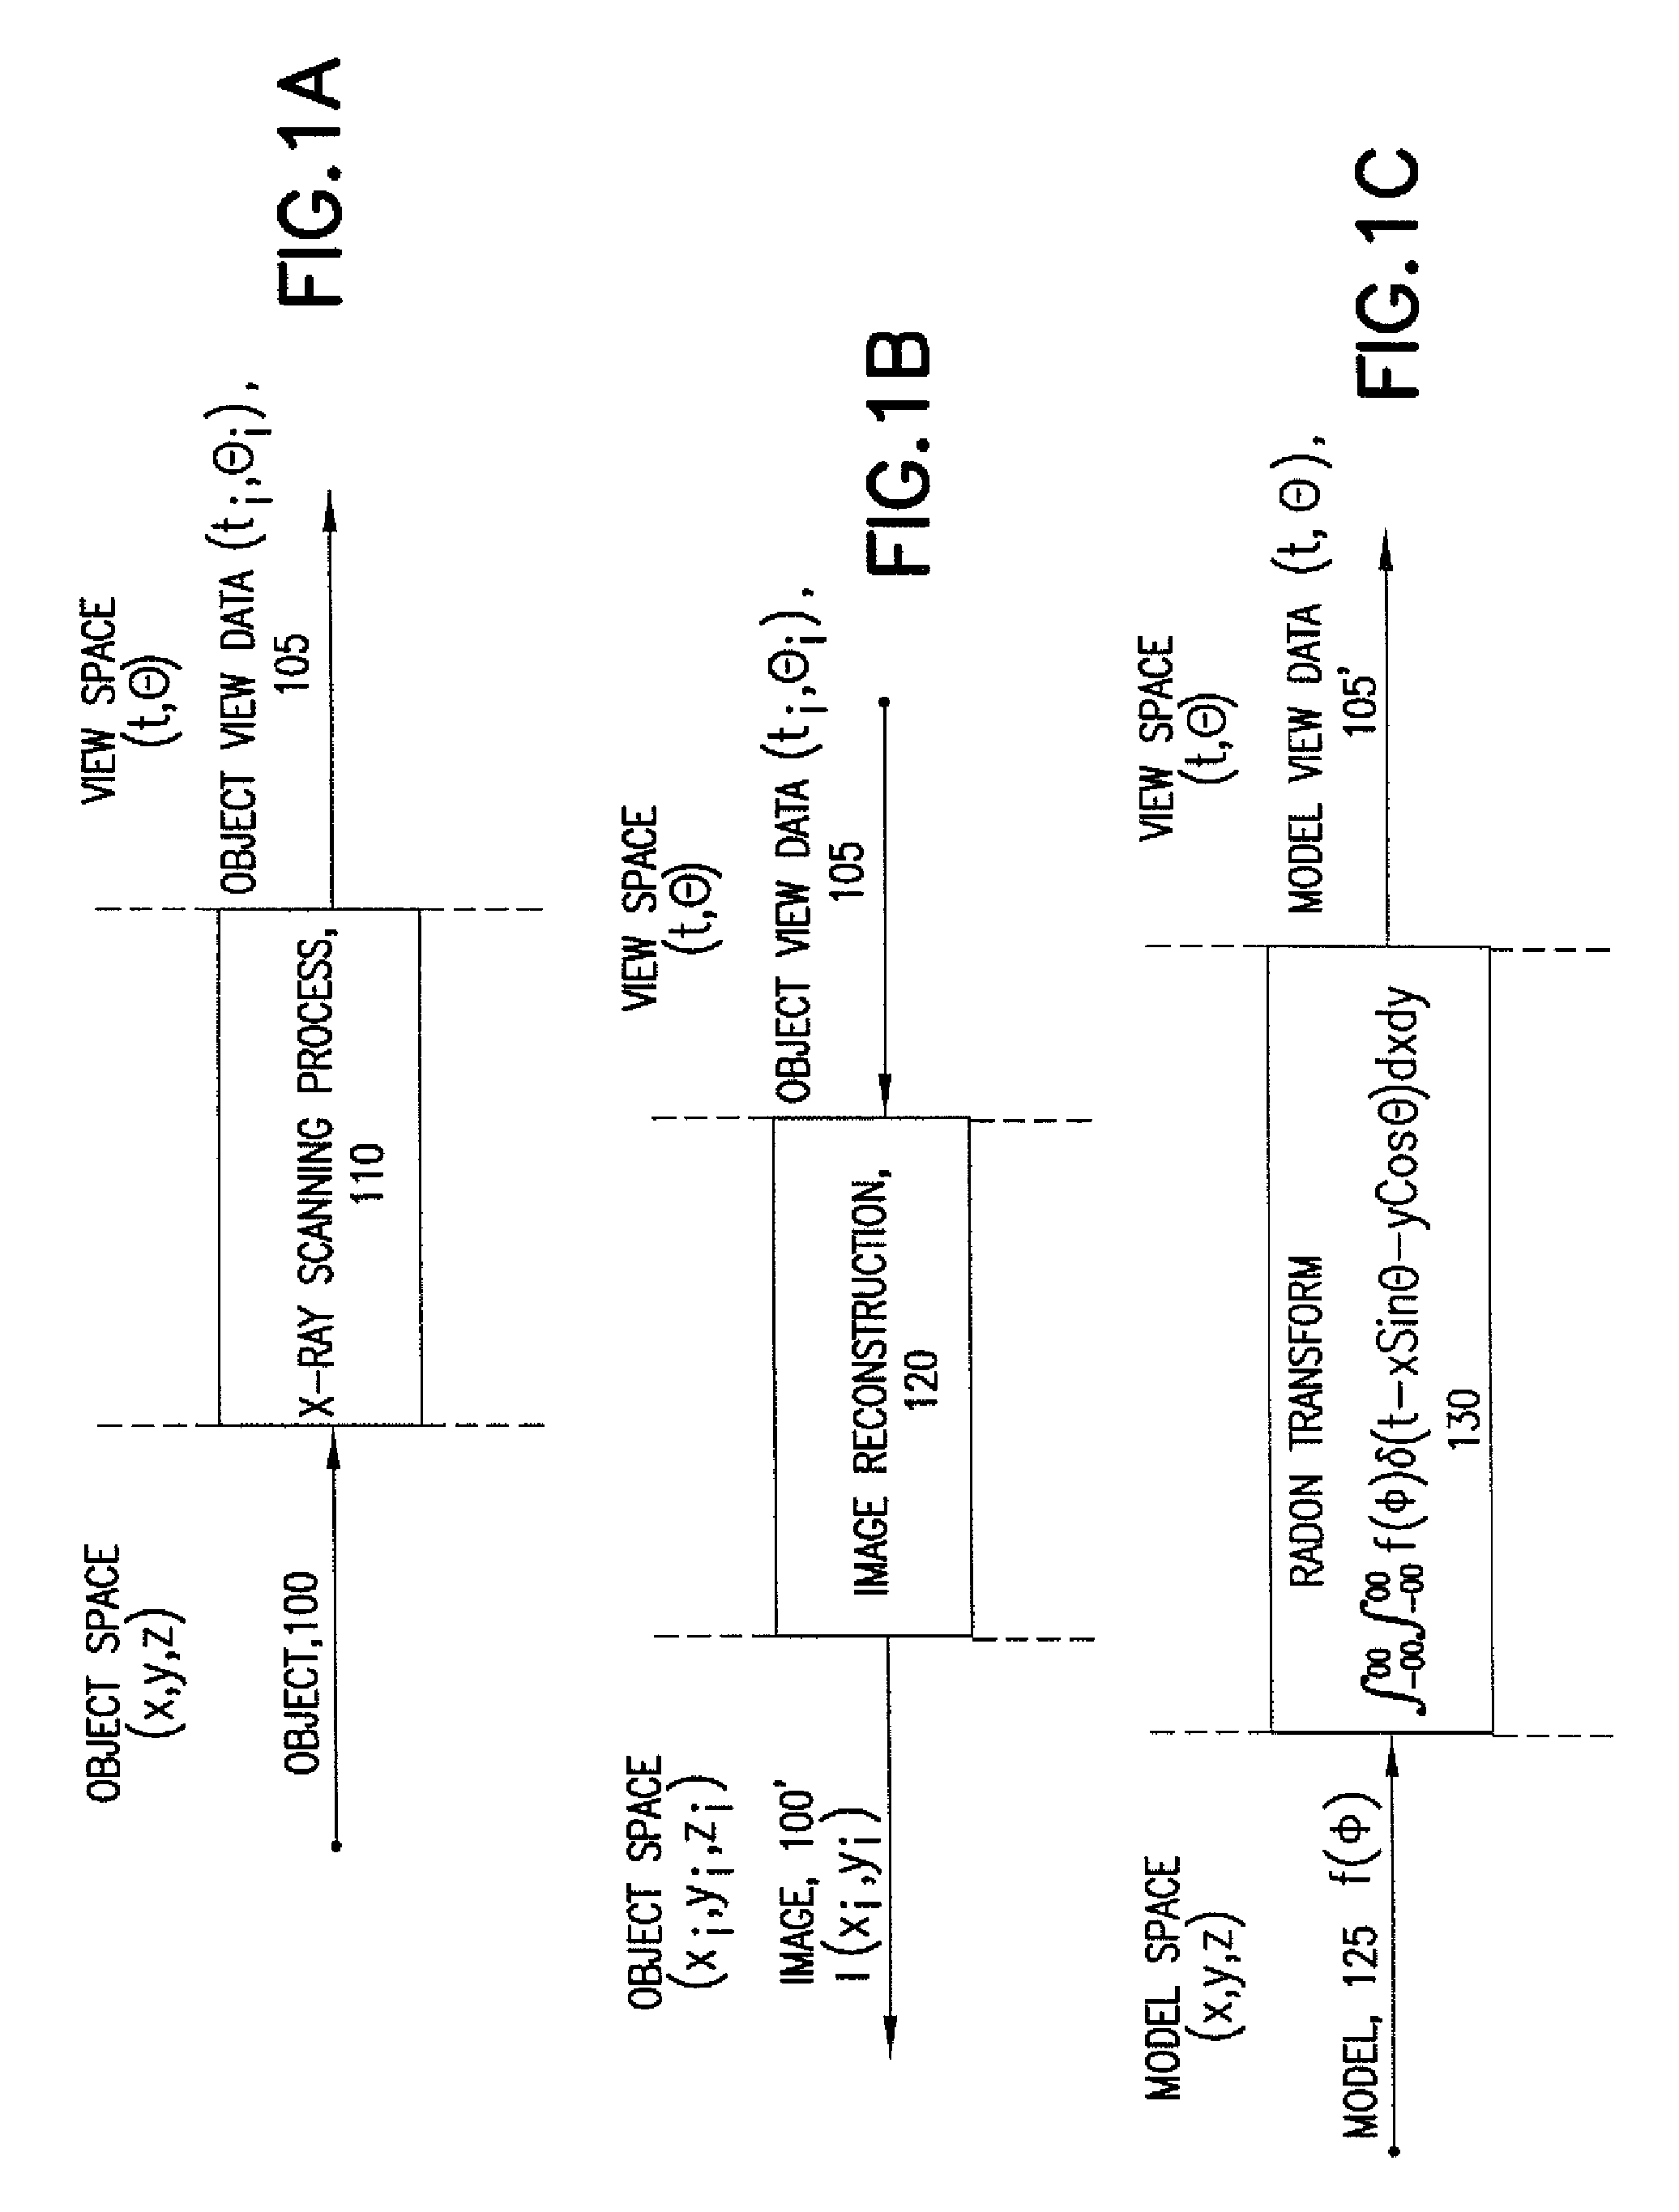 Methods and apparatus for model-based detection of structure in view data